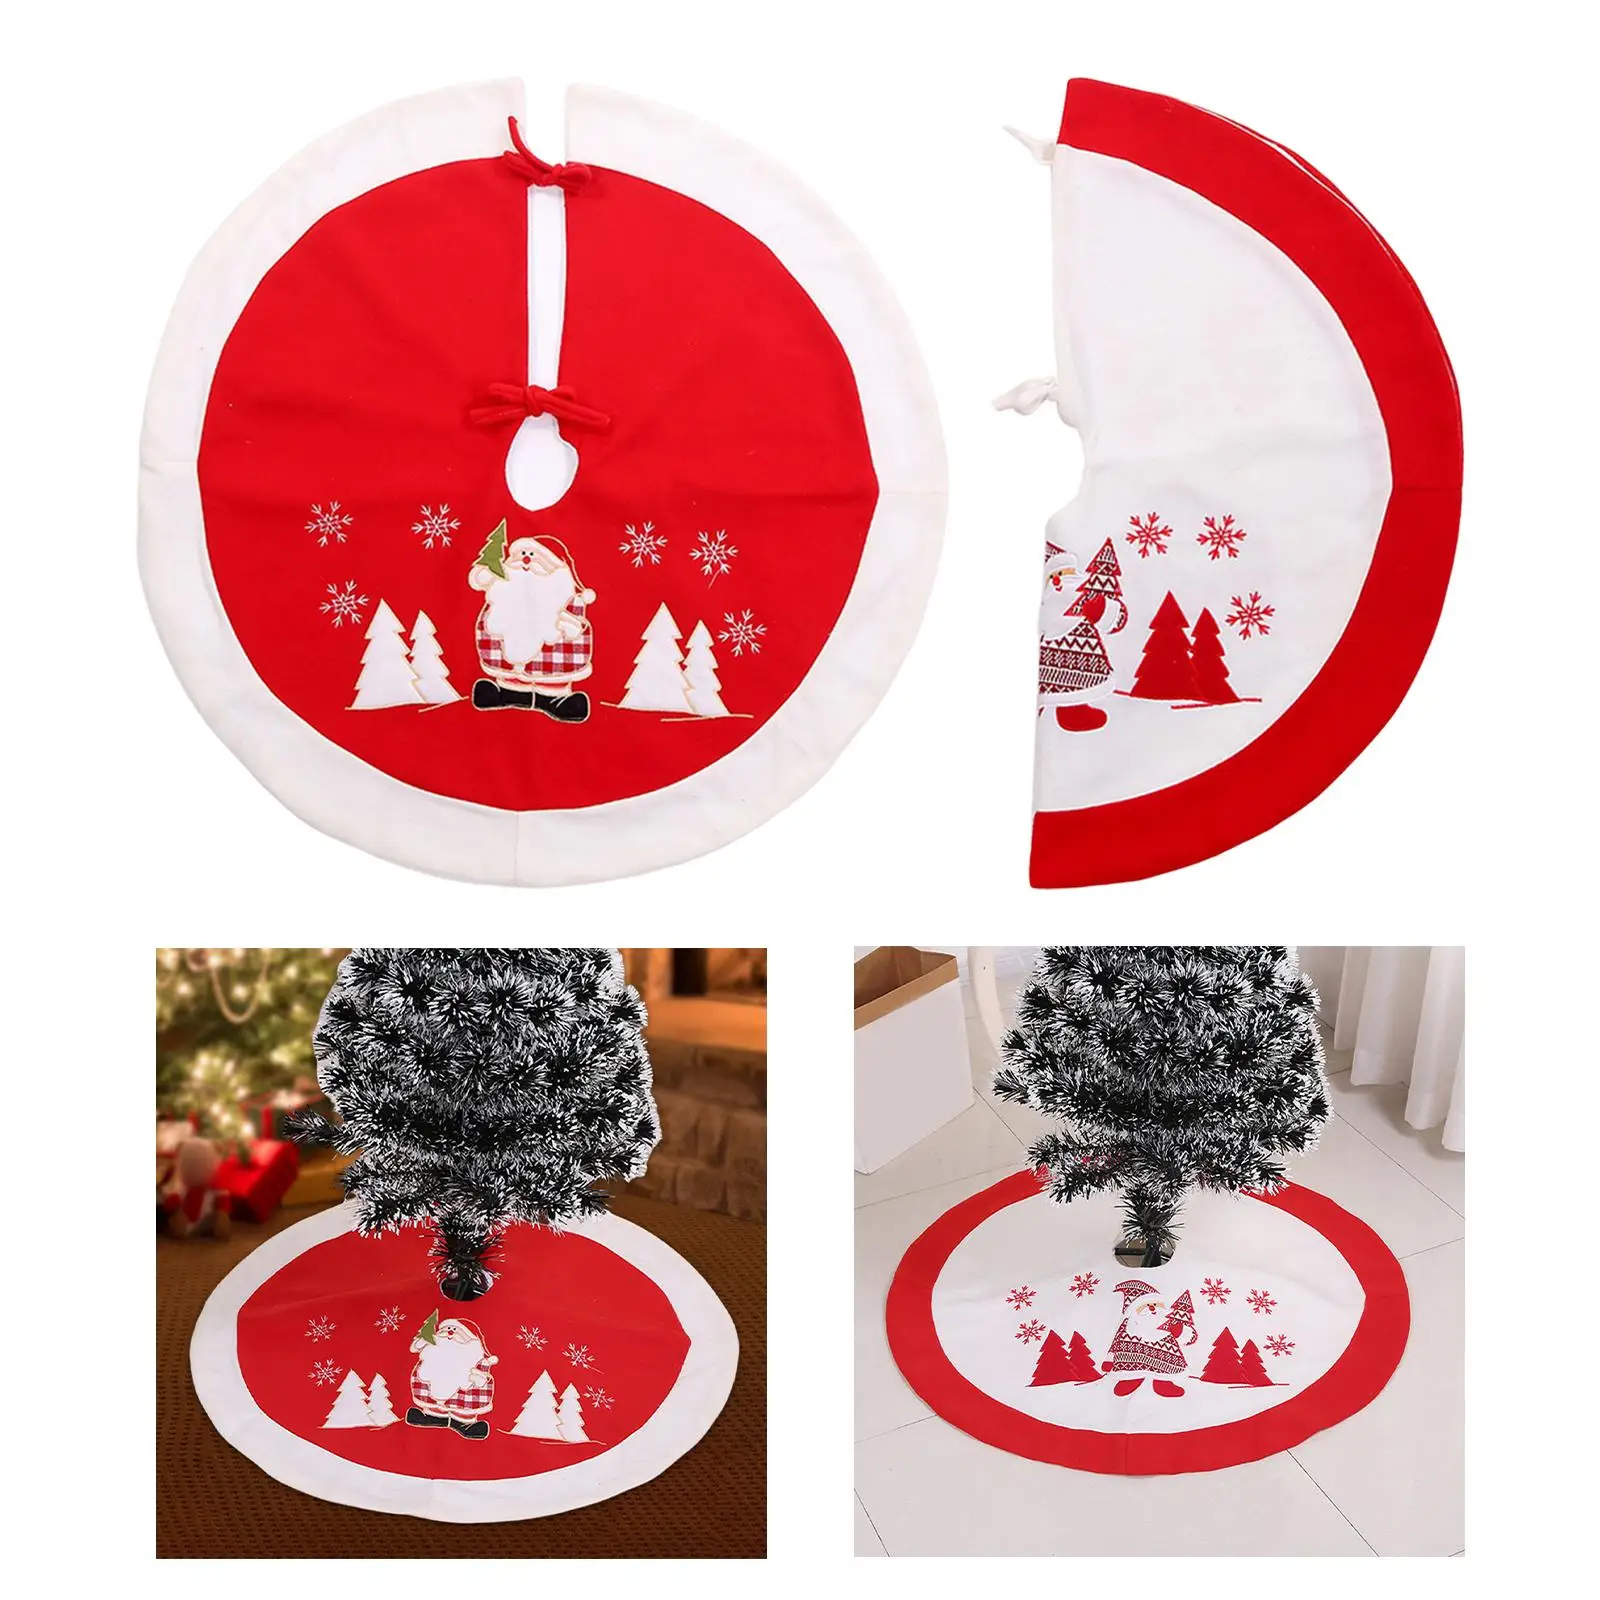 35inch Christmas Tree Skirt with Santa Claus Pattern Vintage Ornaments Xmas Tree Mat for Outdoor office home